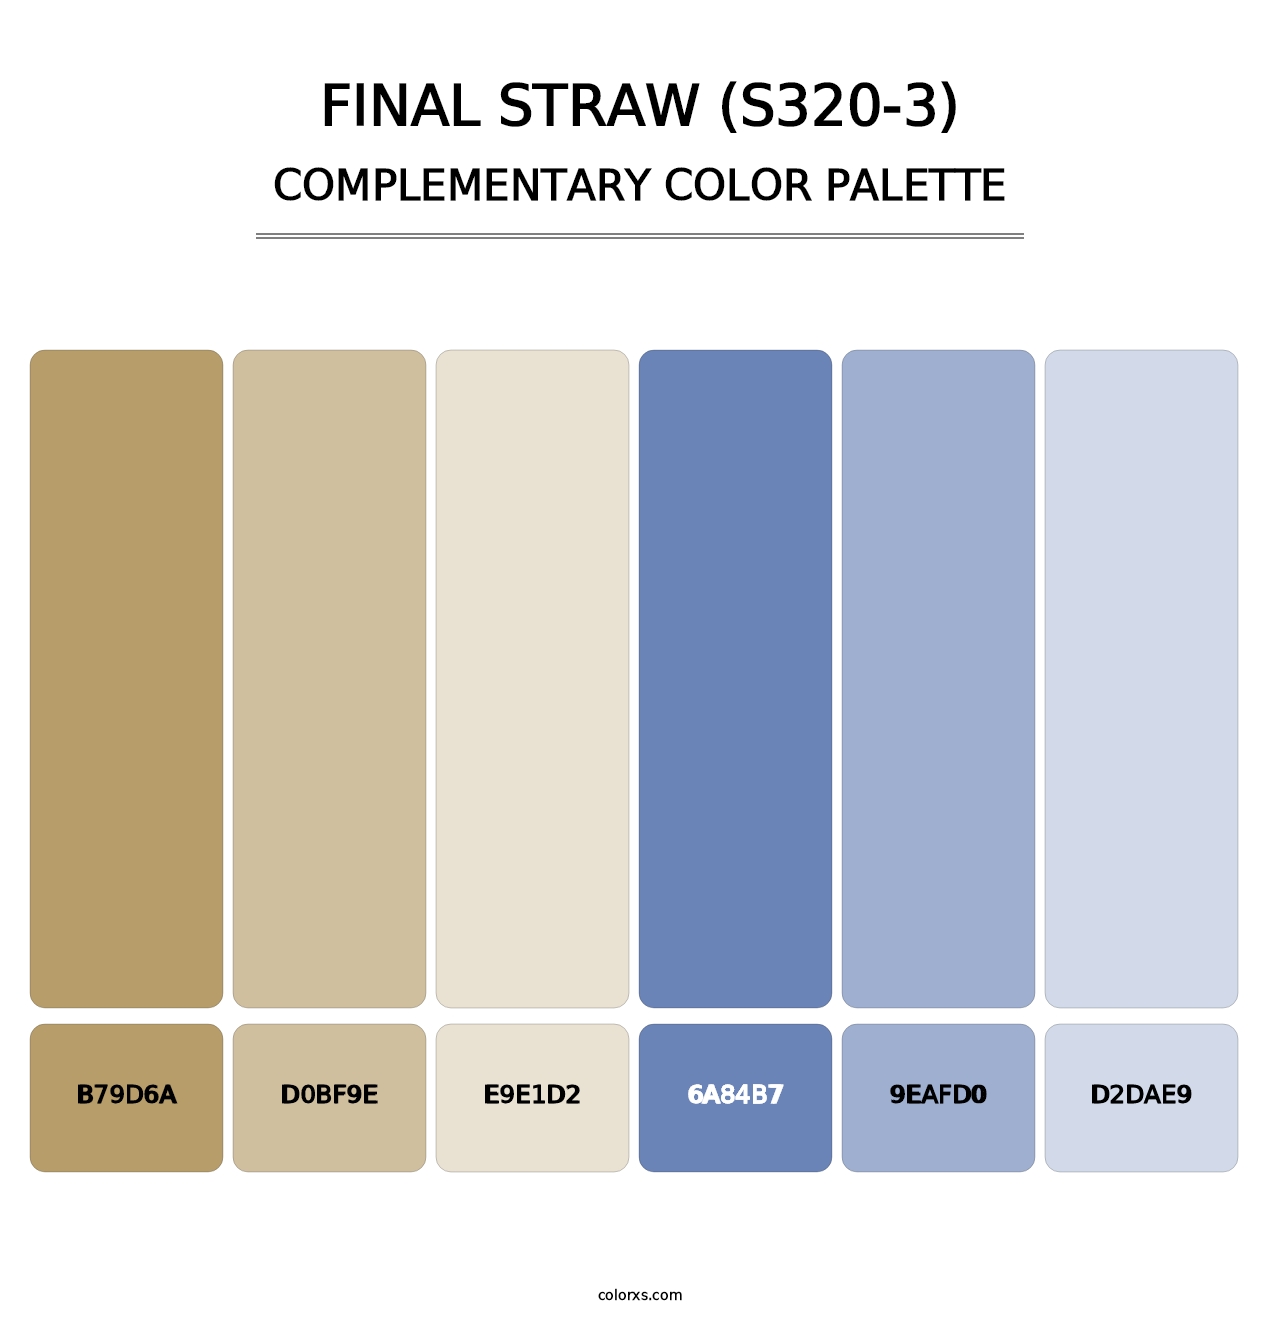 Final Straw (S320-3) - Complementary Color Palette